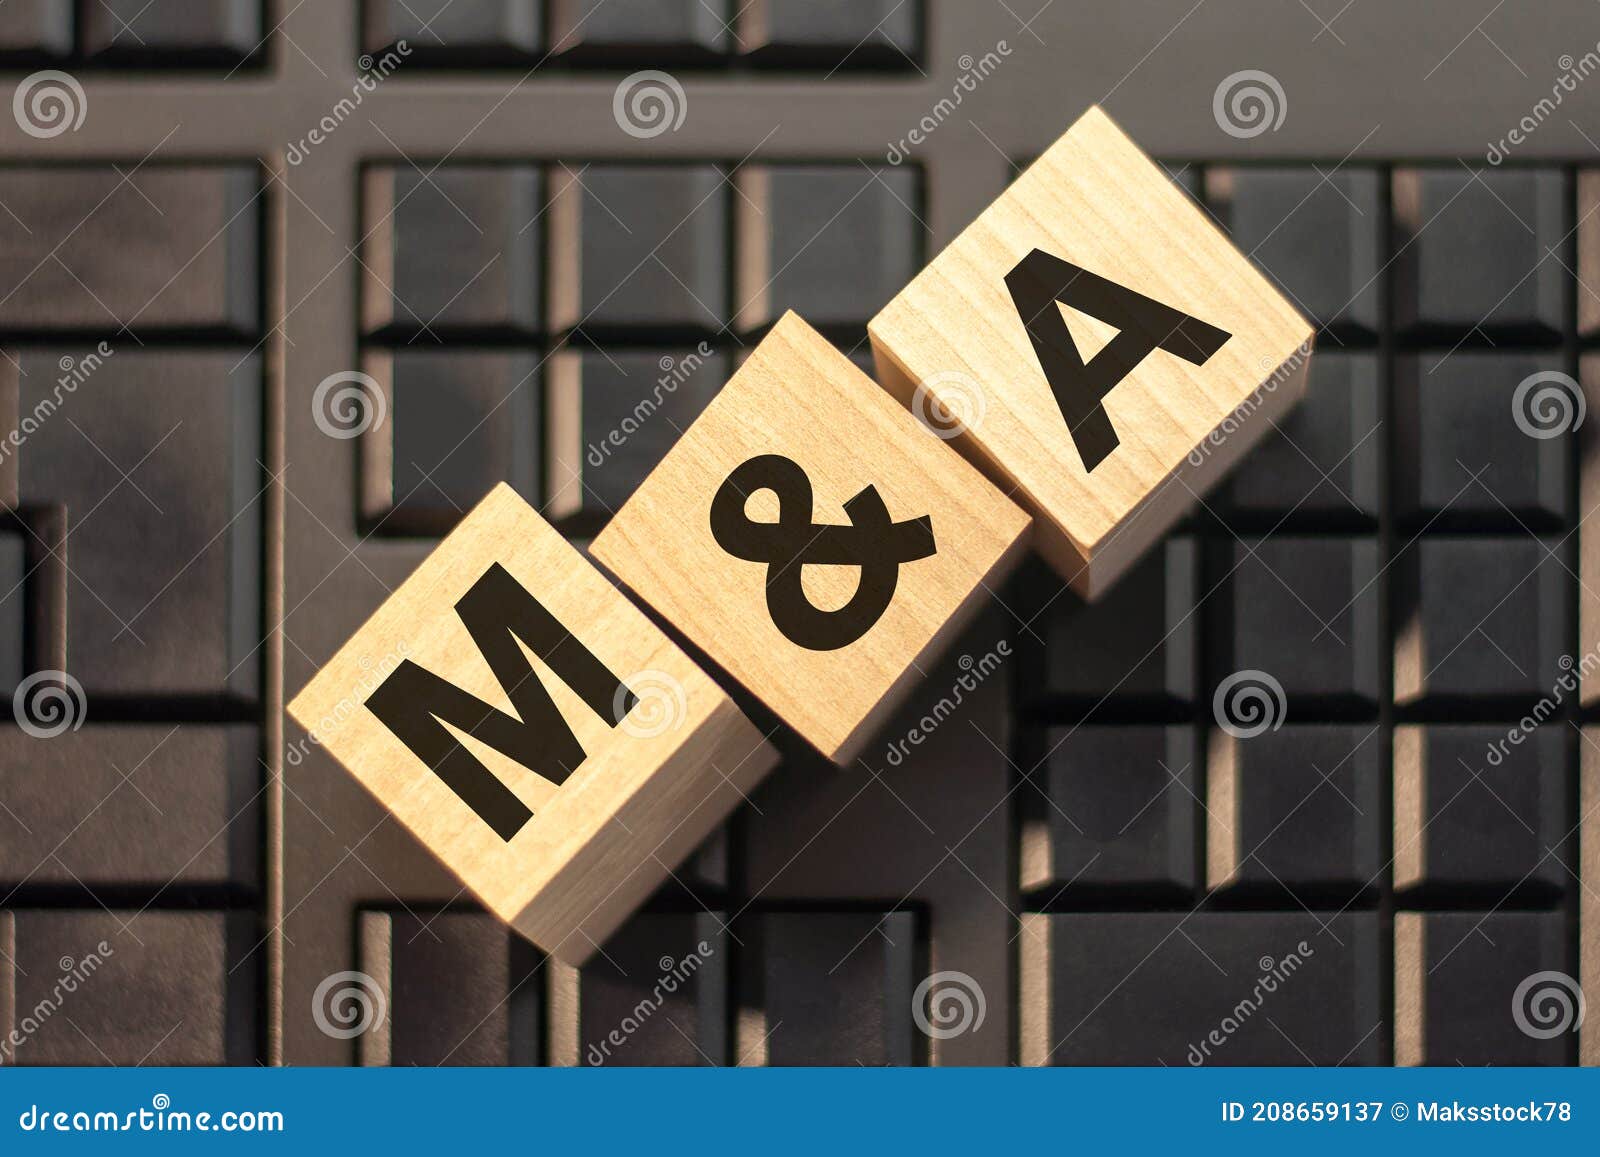 m a - acronym from wooden blocks with letters, concept. m and a - mergers and acquisitions